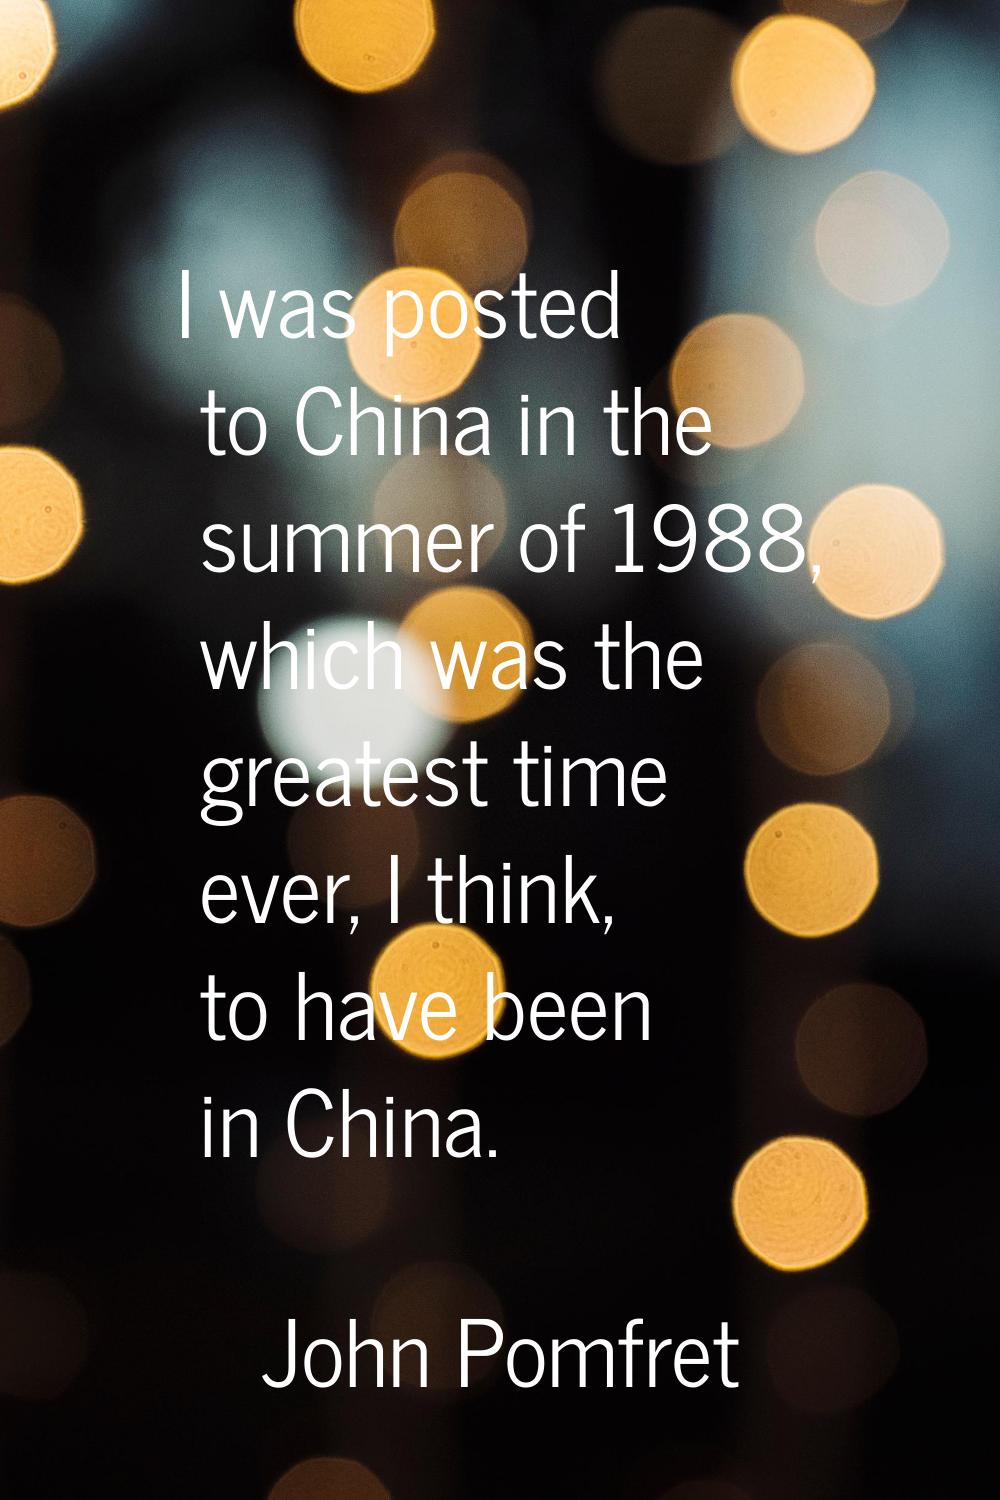 I was posted to China in the summer of 1988, which was the greatest time ever, I think, to have bee